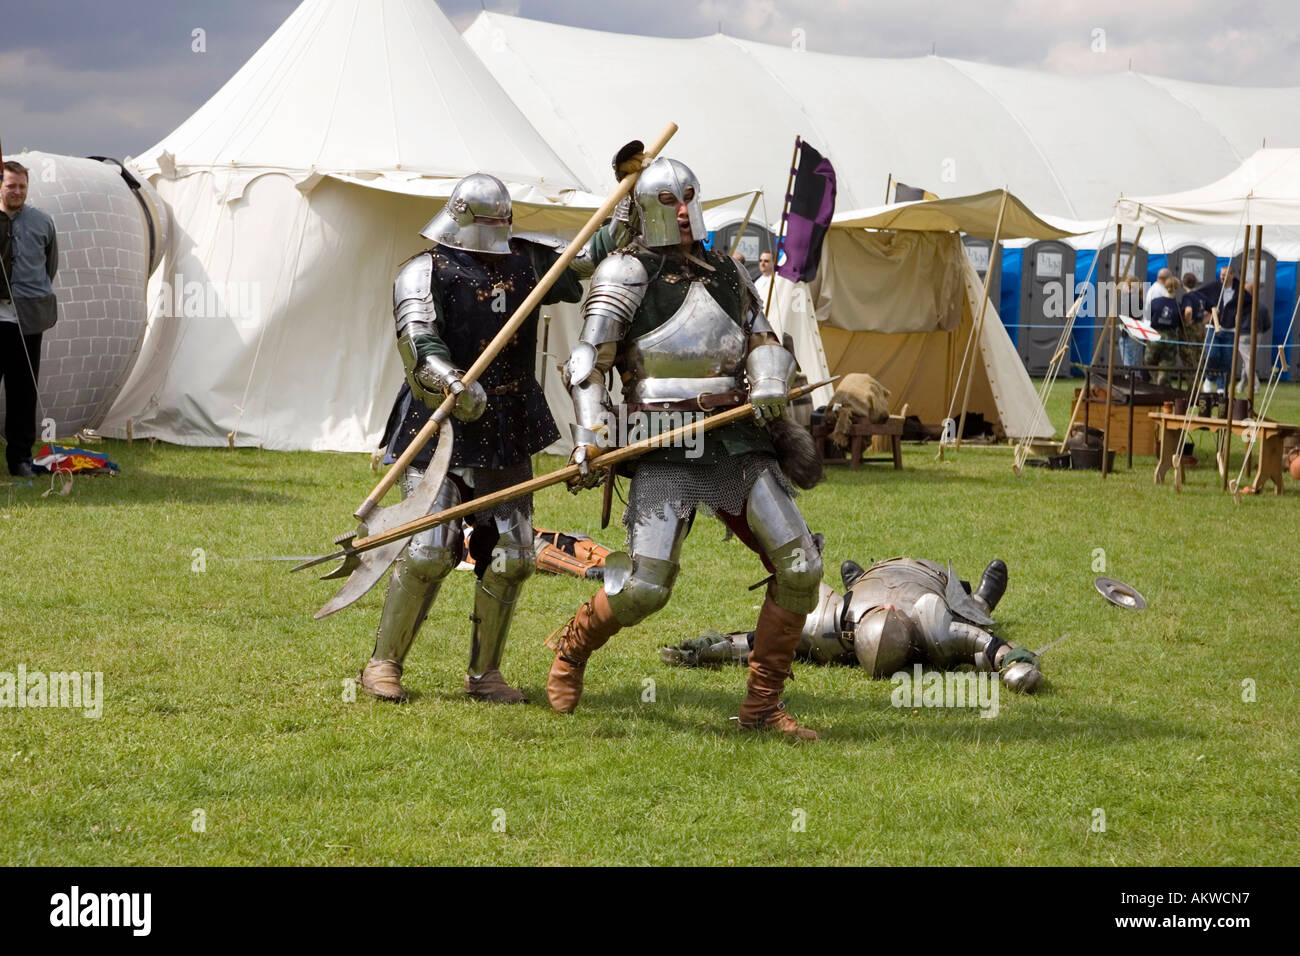 a re-enactment of medieval soldiers fighting as a display in Suffolk, UK Stock Photo